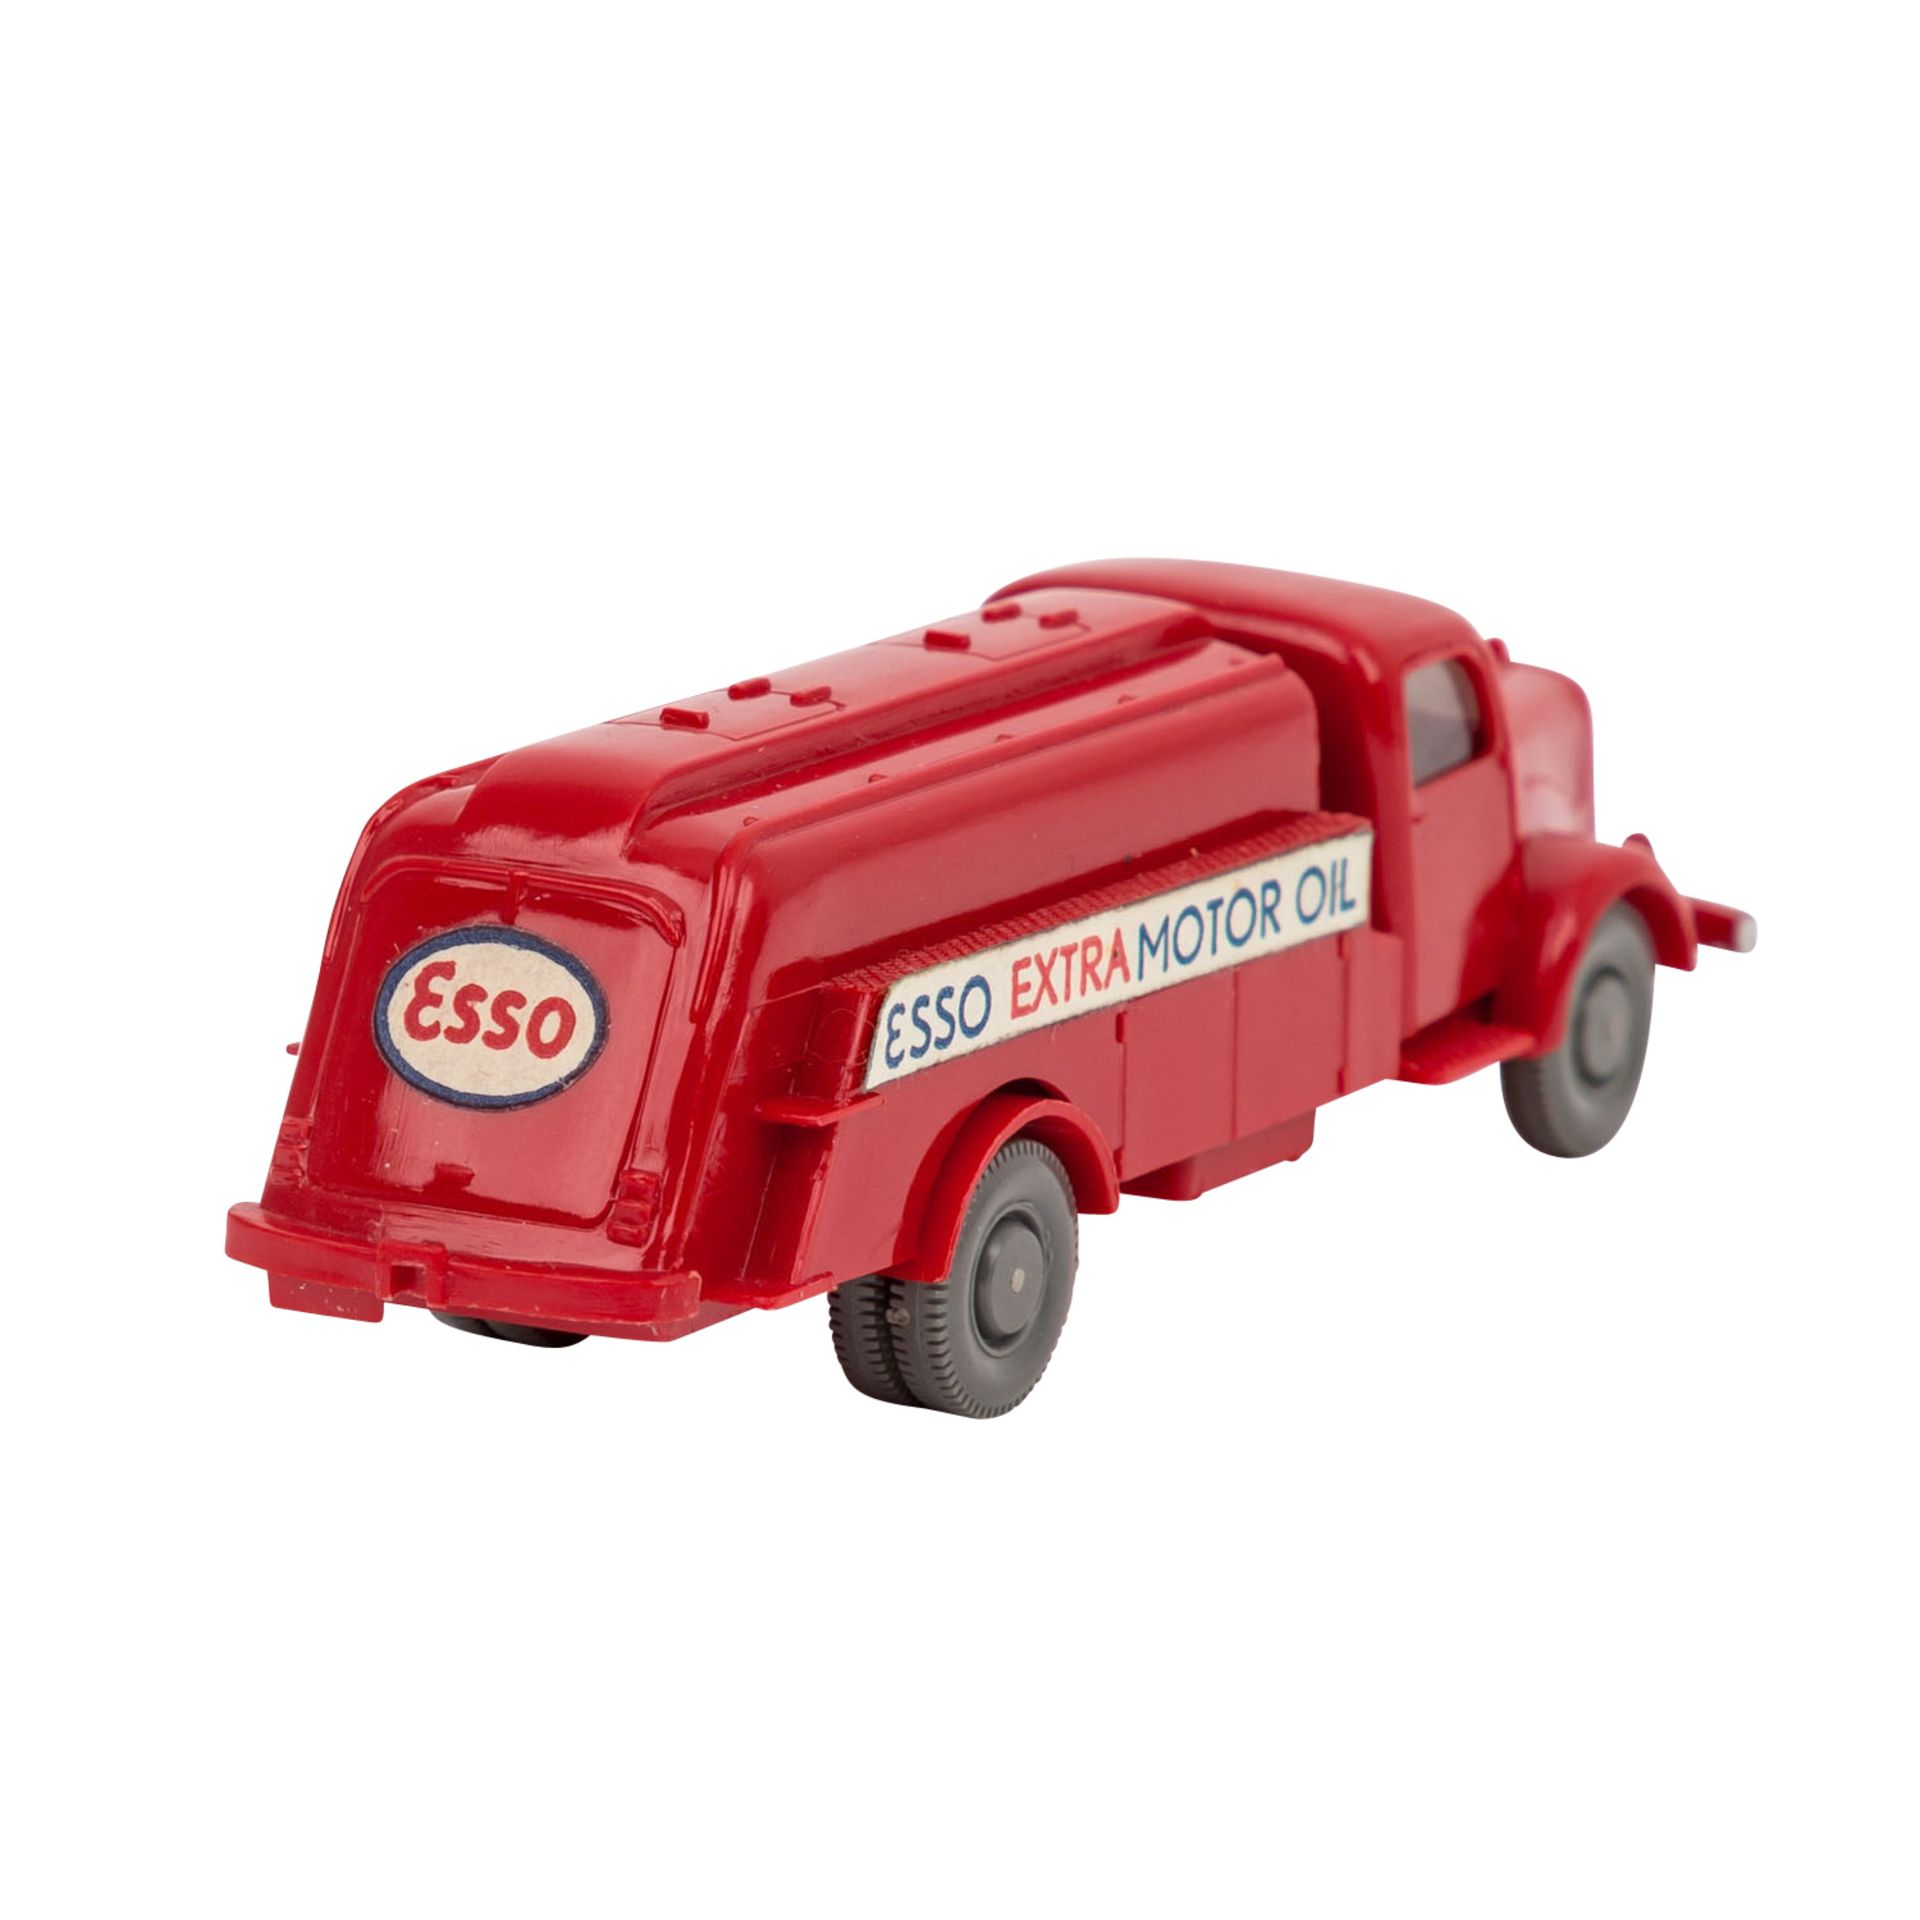 WIKING Mercedes "Esso-Tankwagen", 1962-63, MB L 5000, roter Aufbau und Chassis, Bodenp - Image 3 of 5